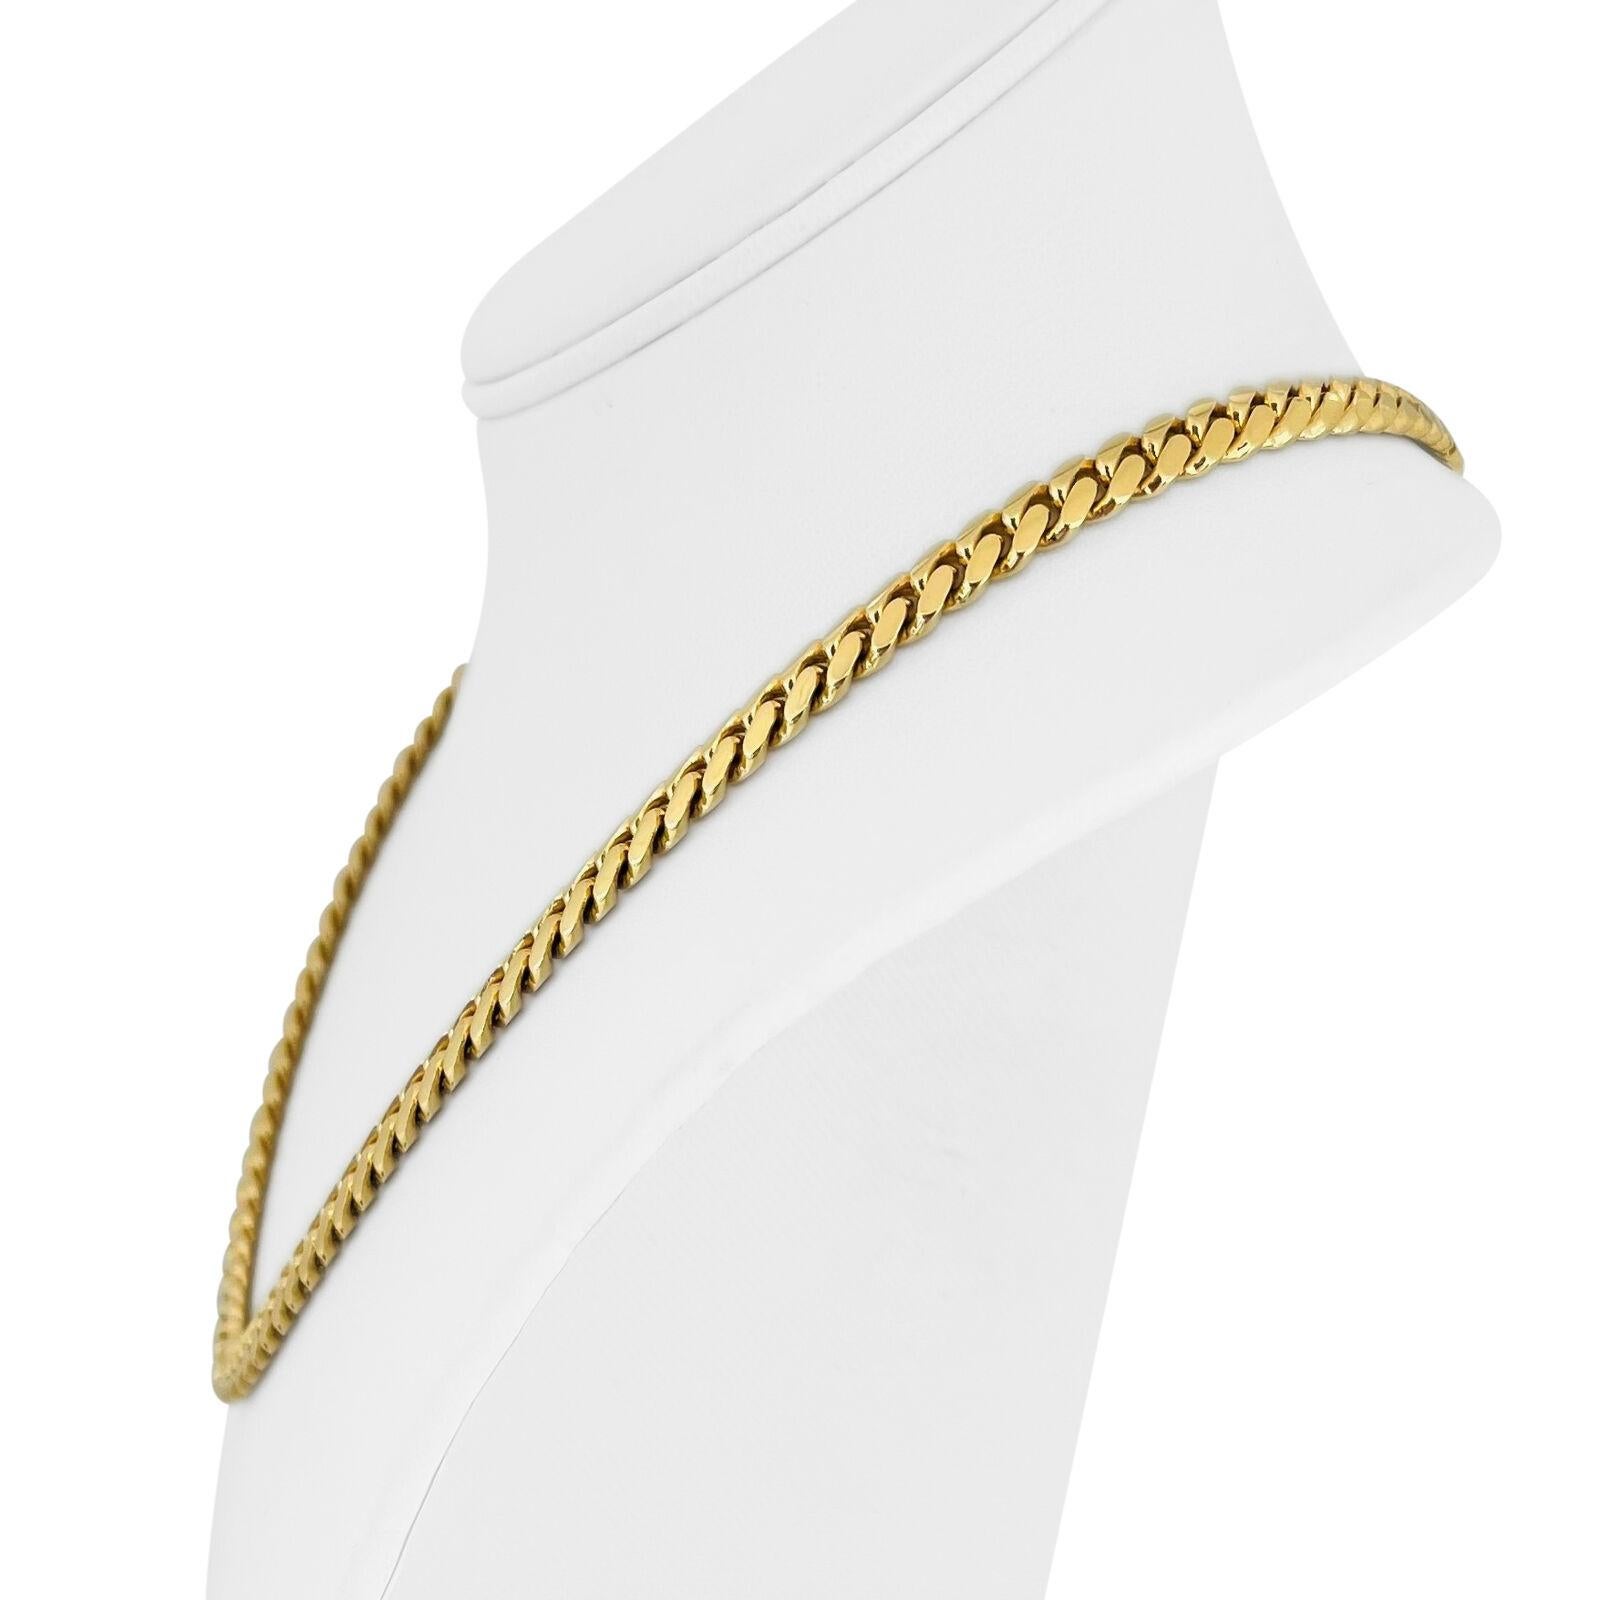 10k Yellow Gold 67.8g Solid High Polish 7mm Cuban Curb Link Chain Necklace 20